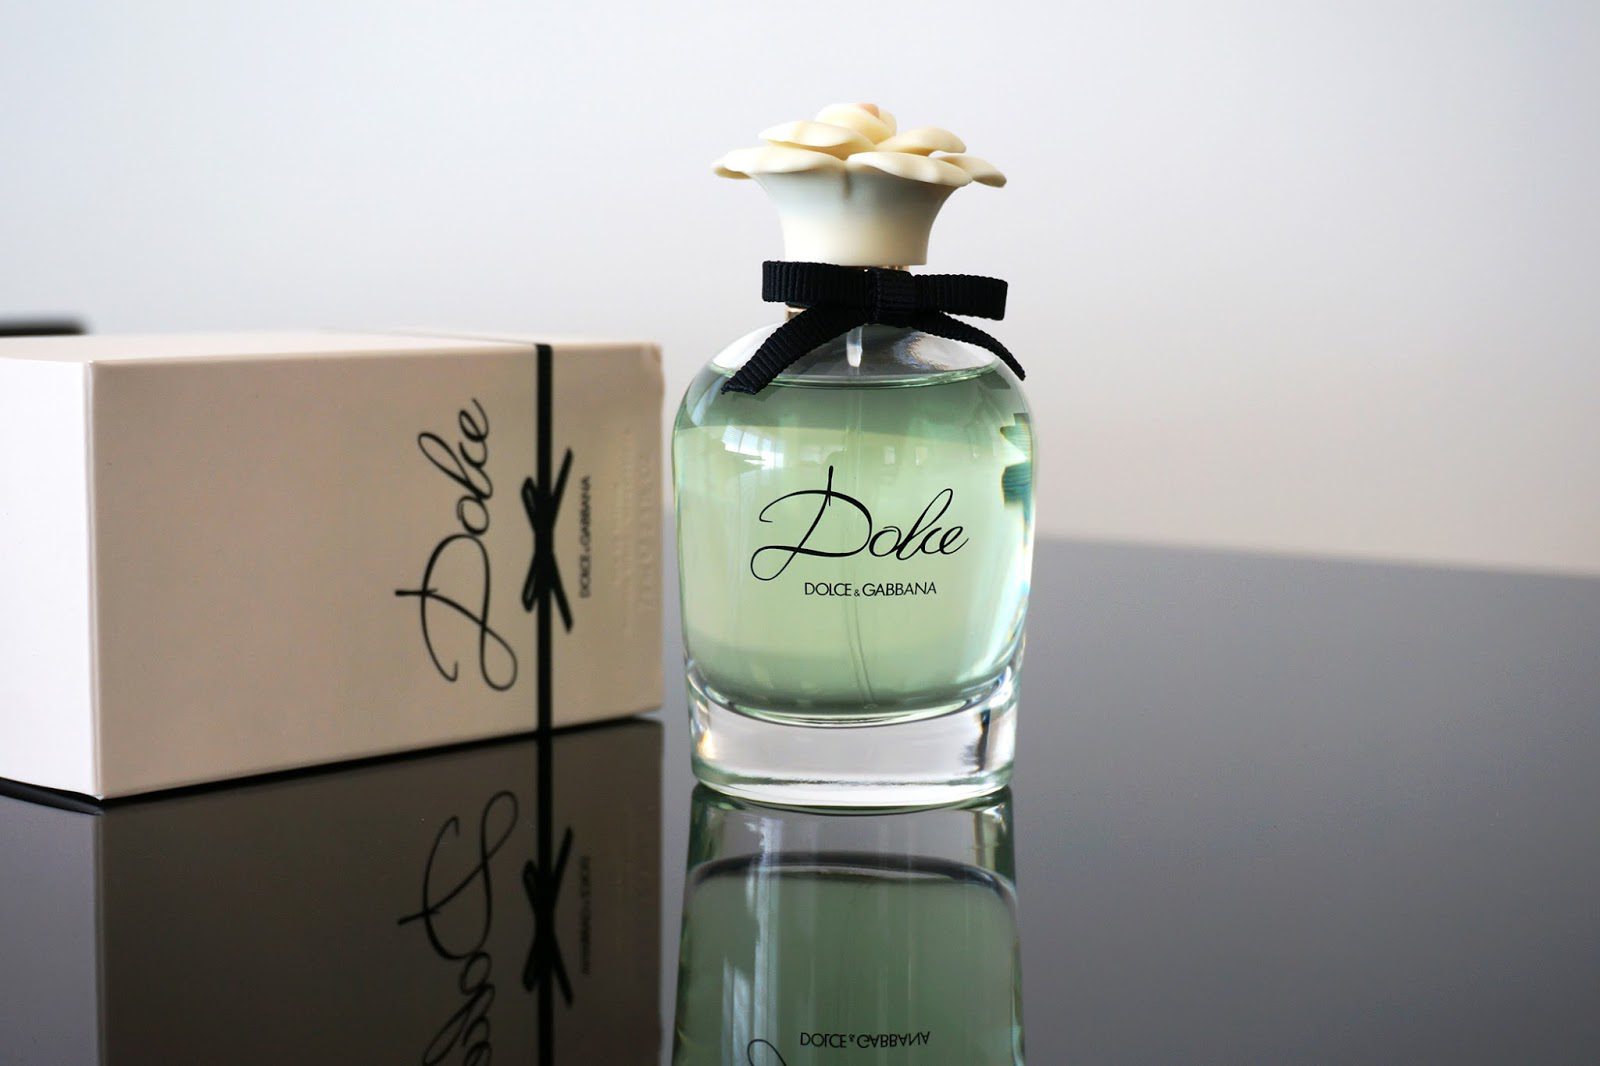 dolce by dolce and gabbana review